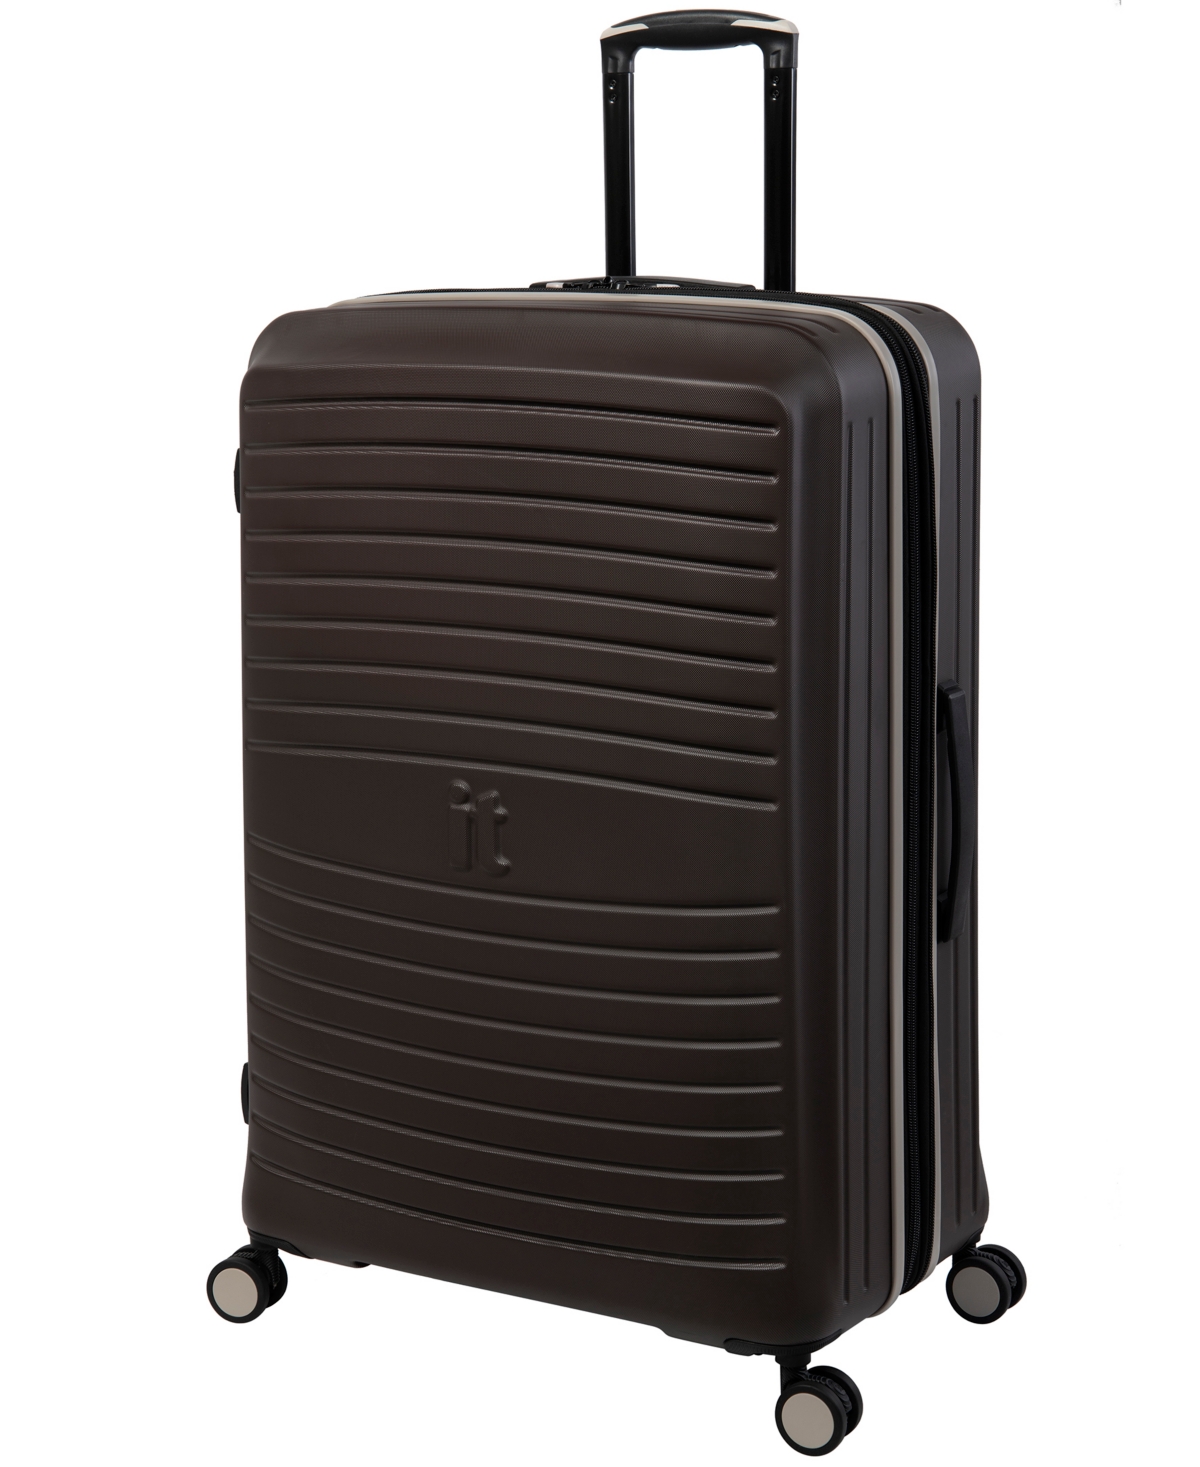 It Luggage 29" Hardside 8-wheel Expandable Spinner Luggage In Coffee Bean